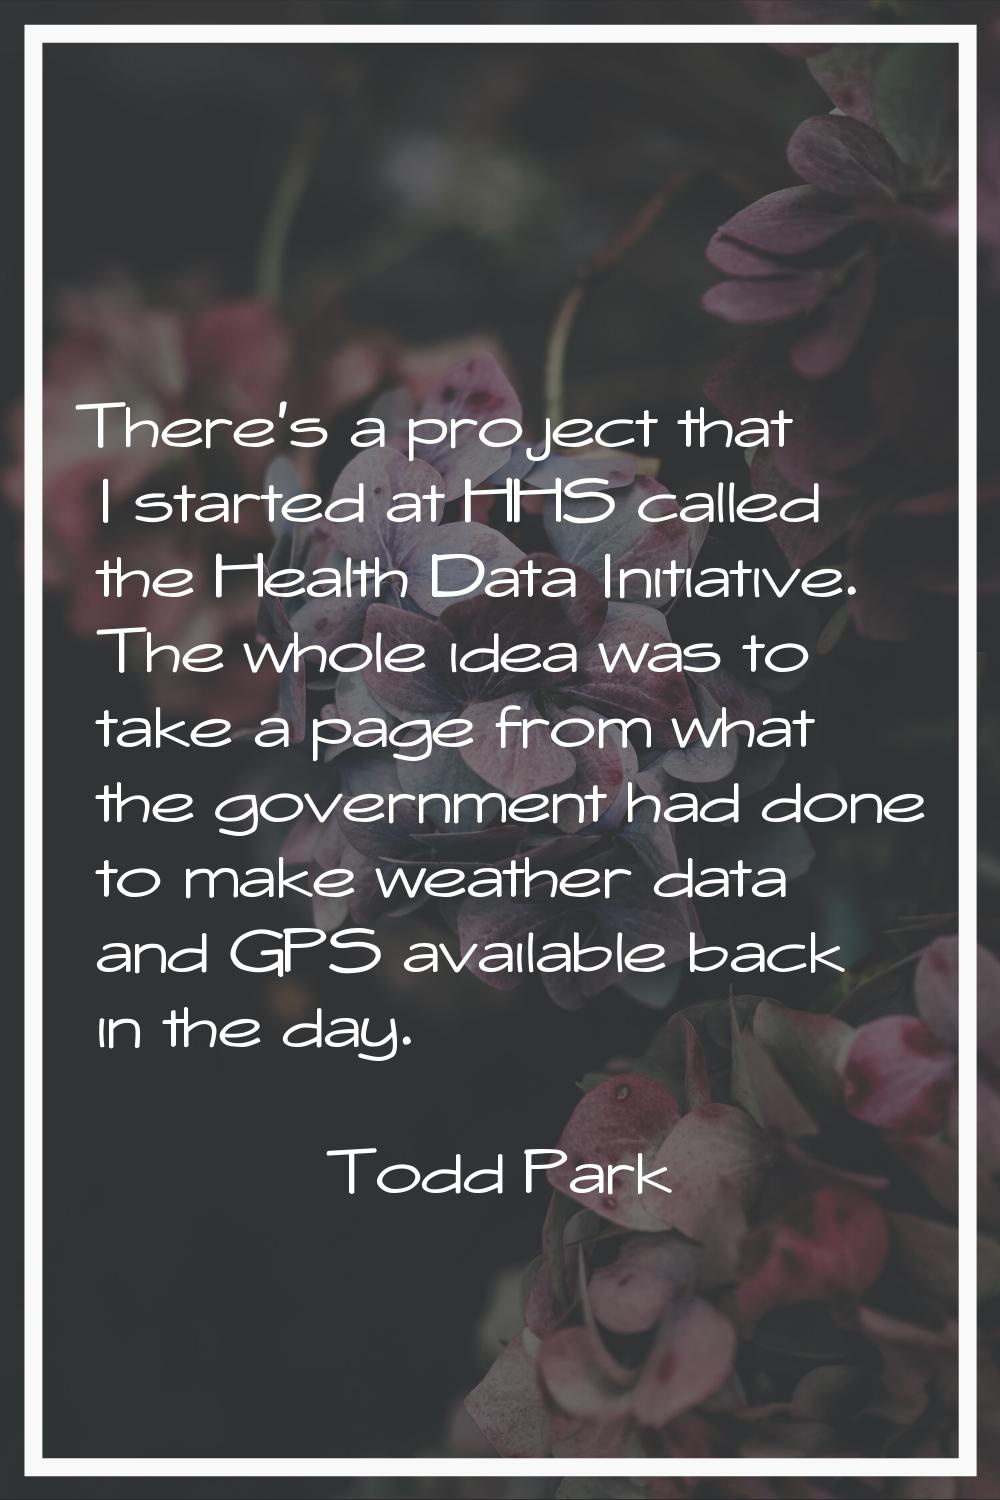 There's a project that I started at HHS called the Health Data Initiative. The whole idea was to ta